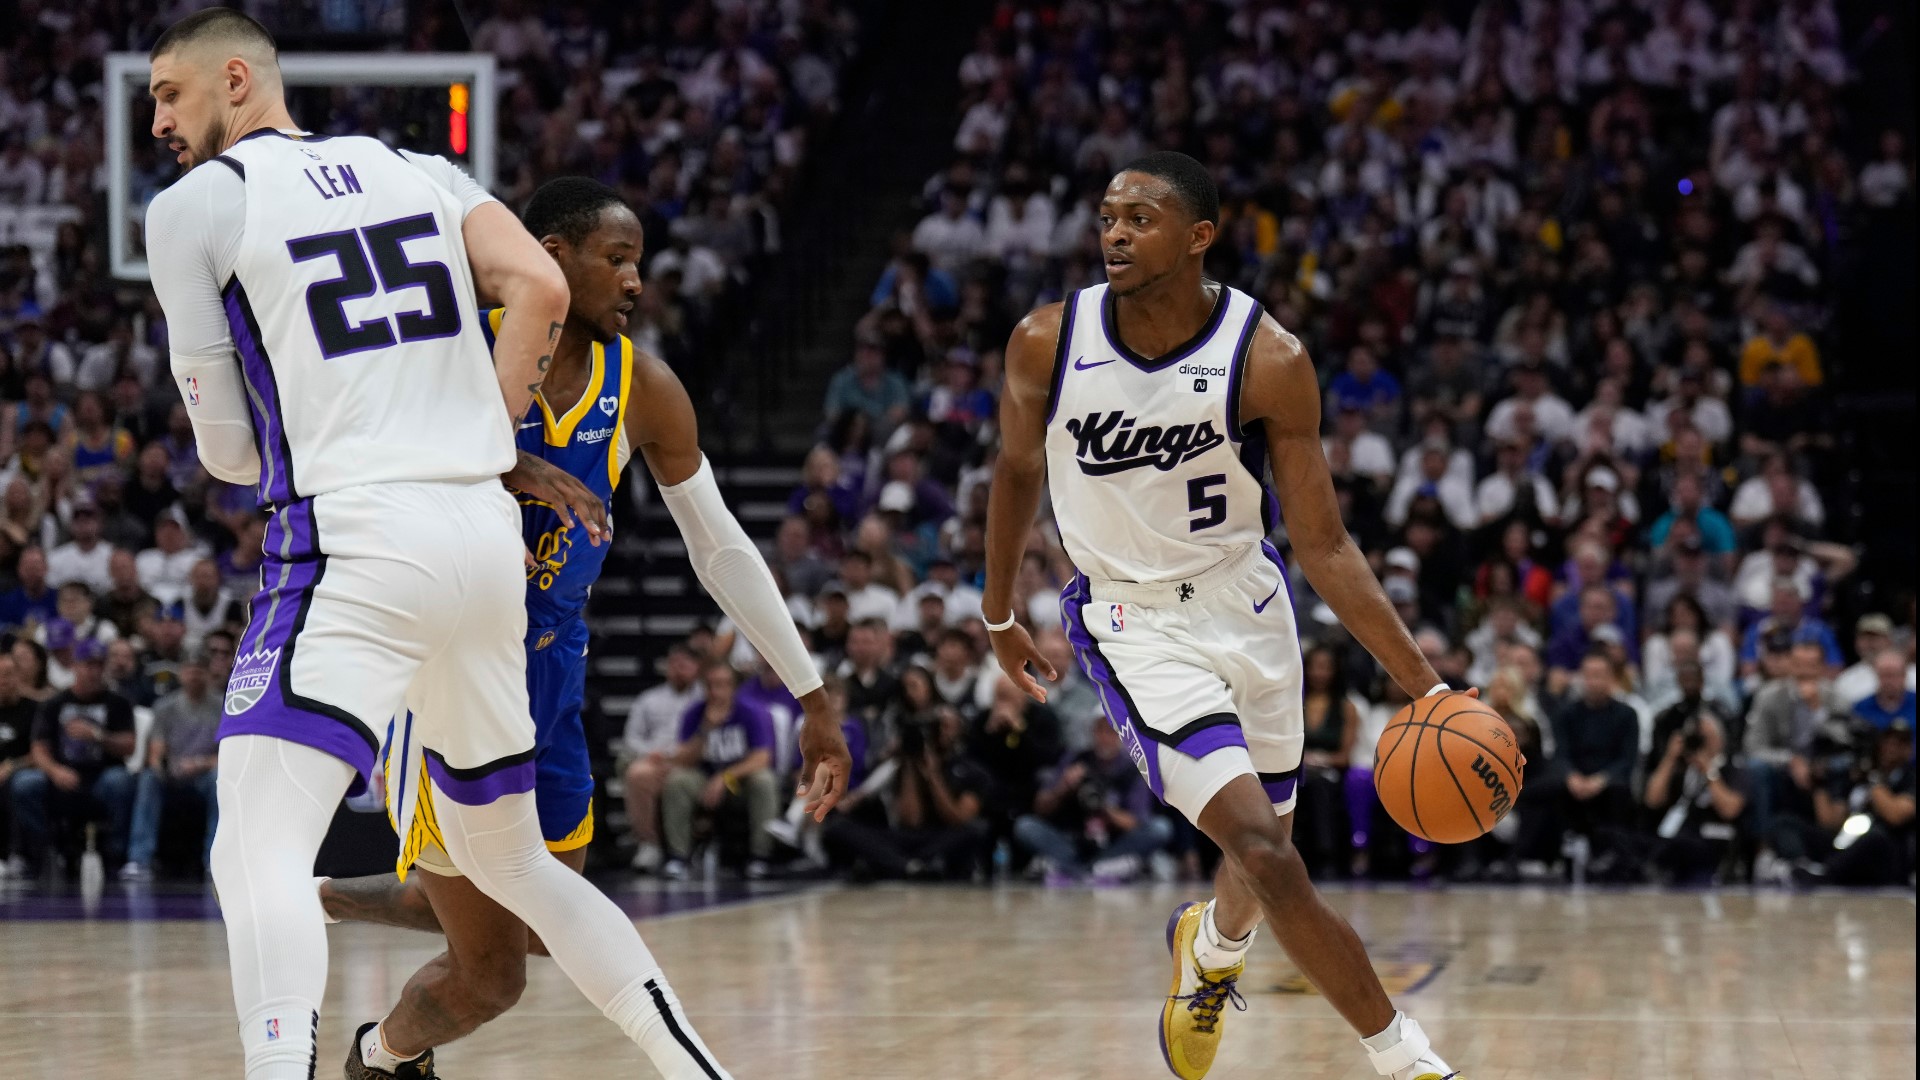 The Sacramento Kings stayed alive in the play-in tournament, eliminating the Golden State Warriors with a 118-94 victory.